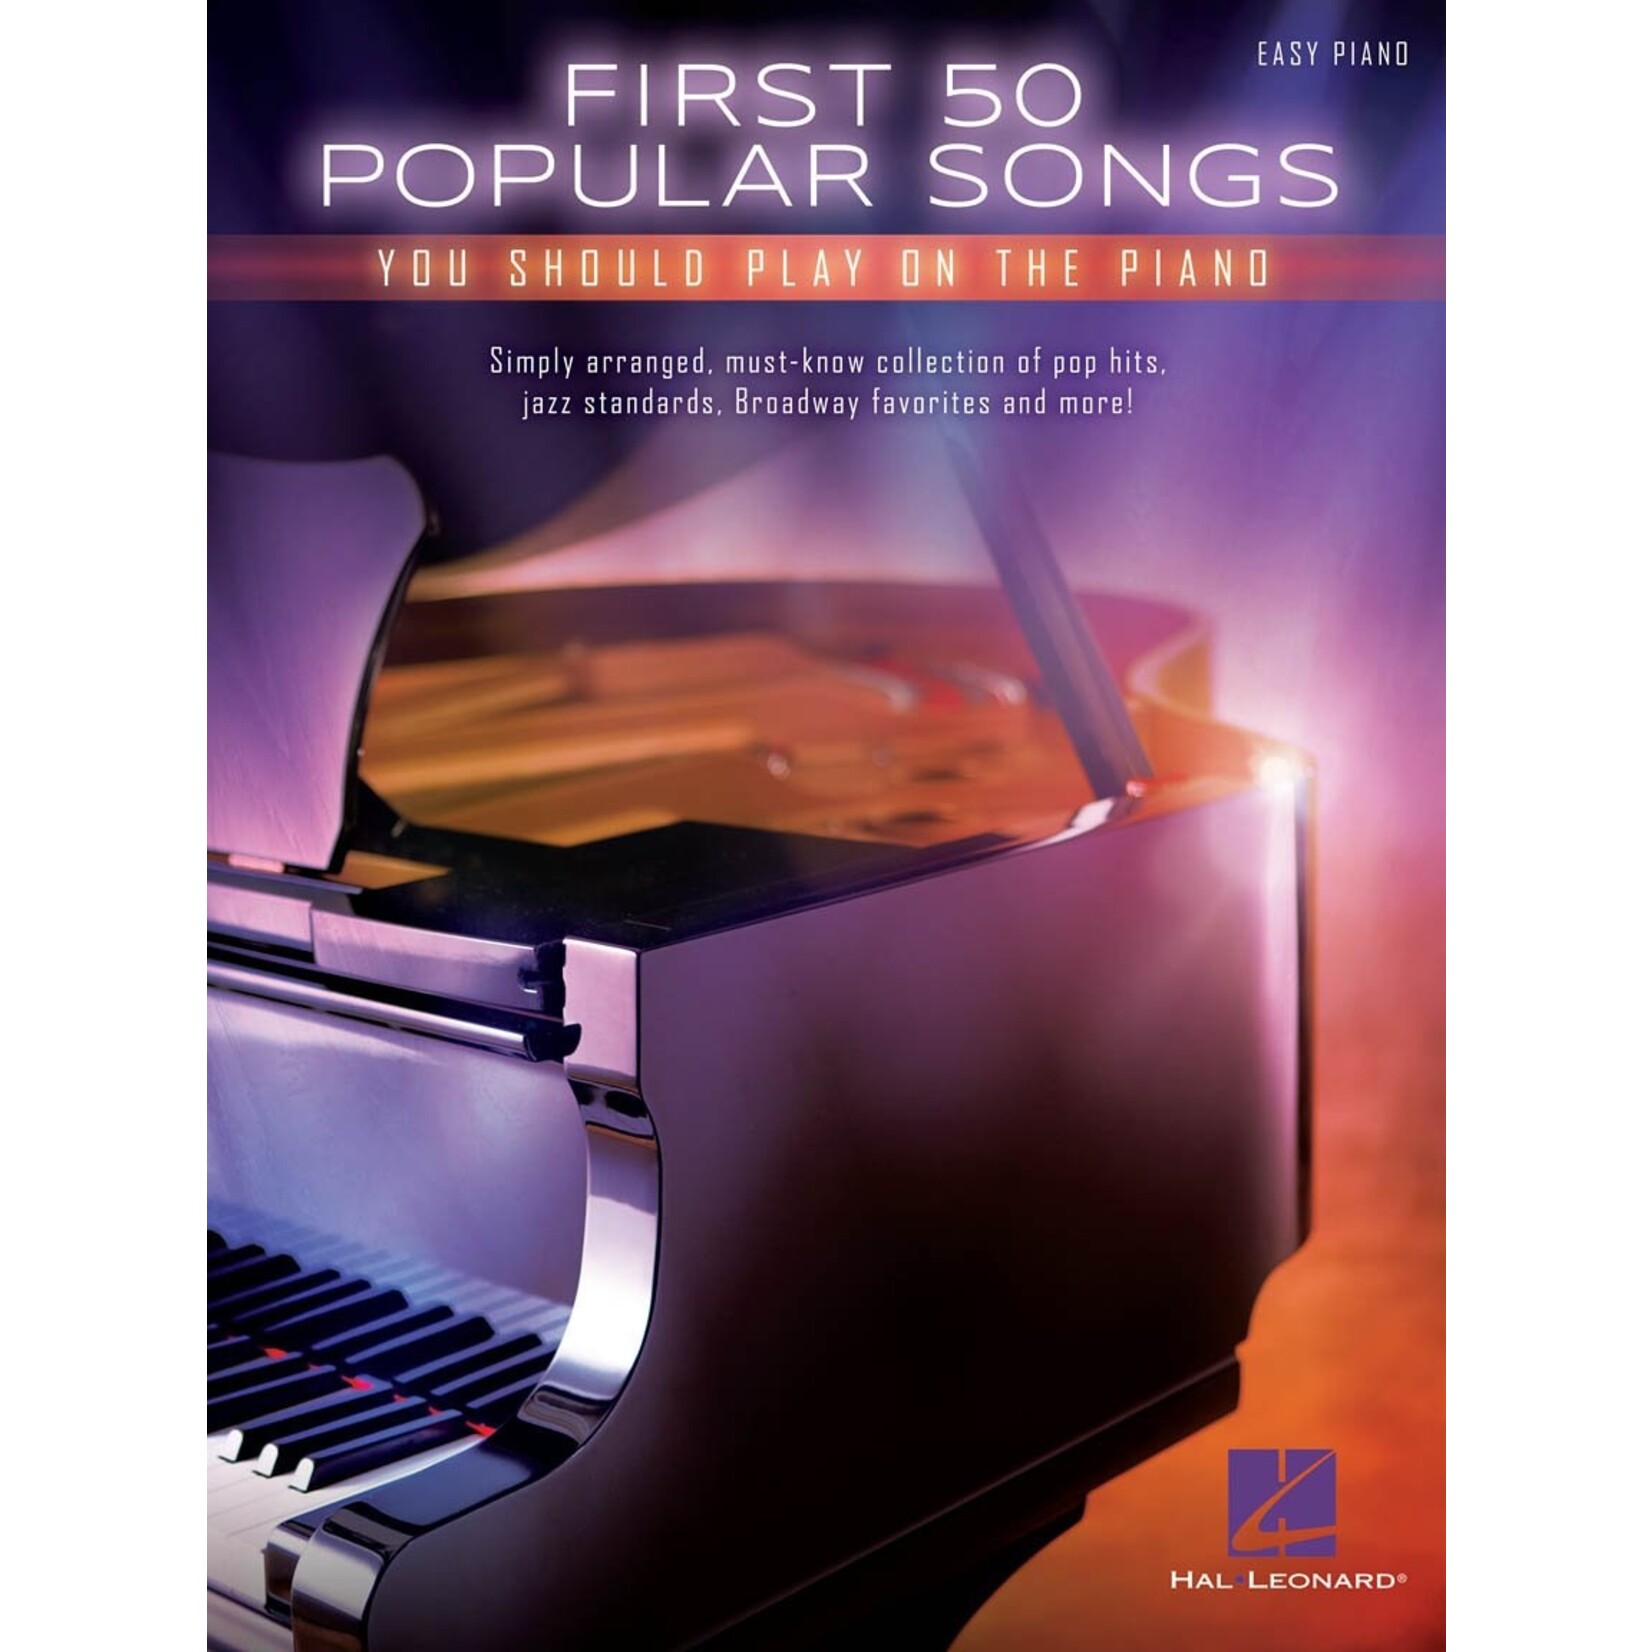 Hal Leonard First 50 Popular Songs You Should Play on the Piano - Easy Piano